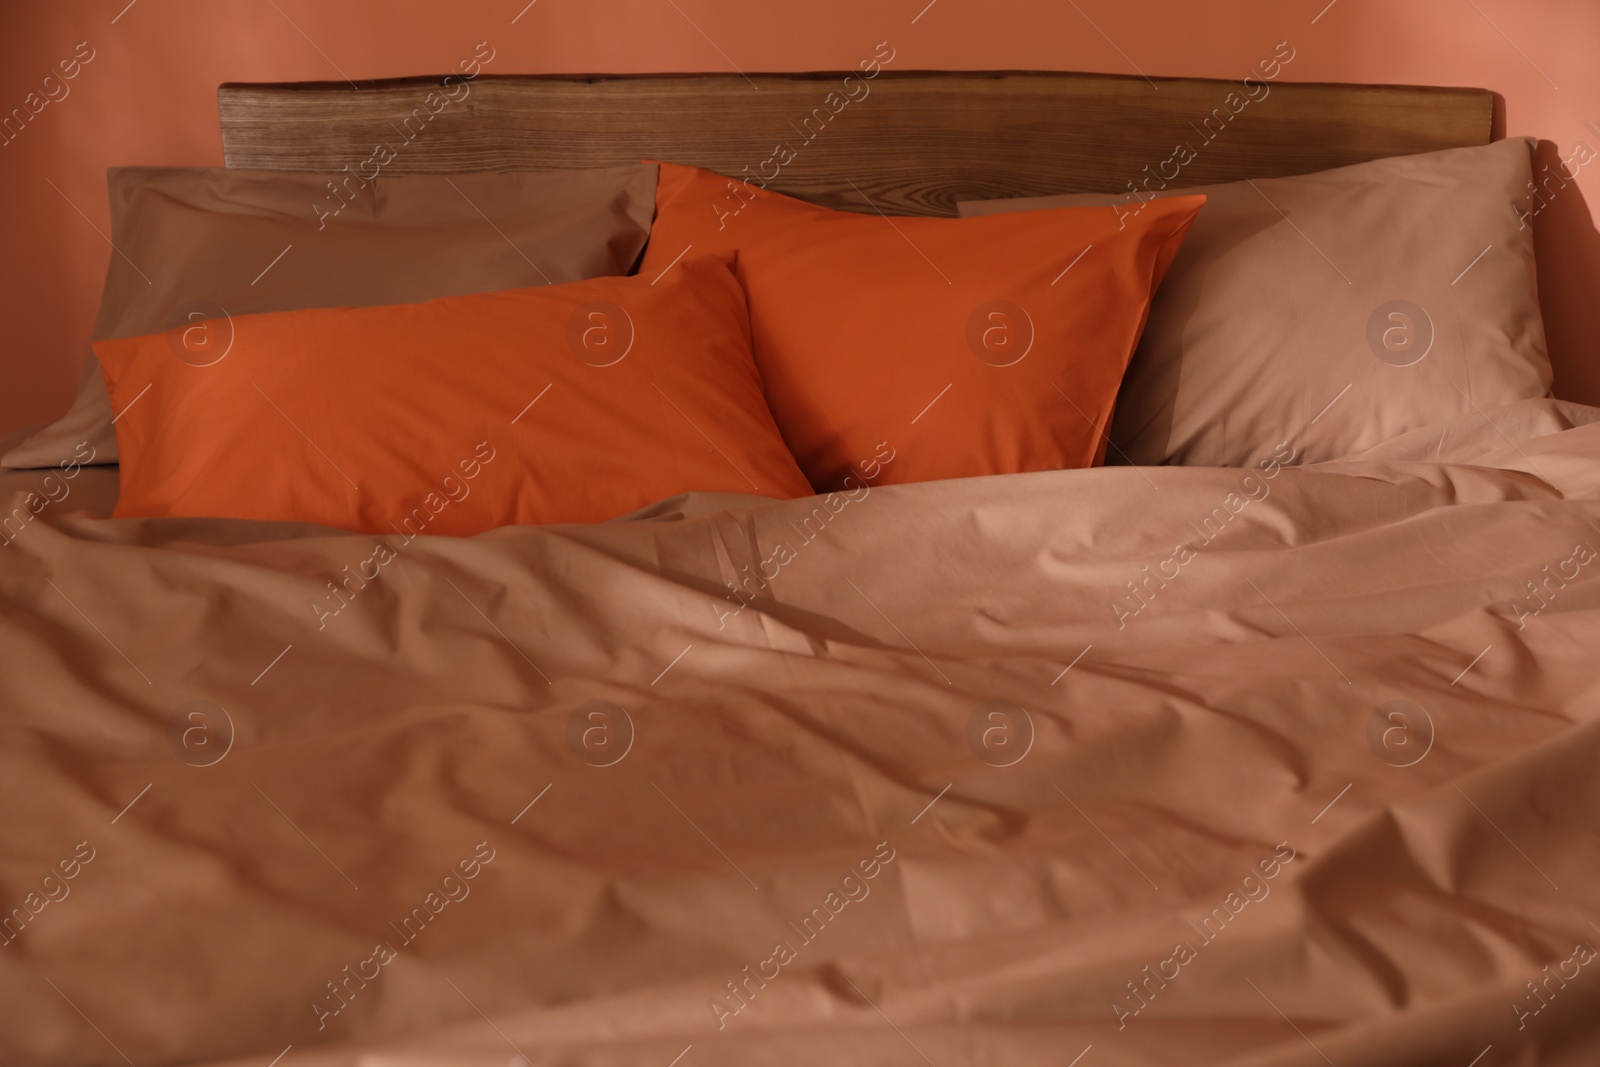 Photo of Orange pillows on bed with brown linens